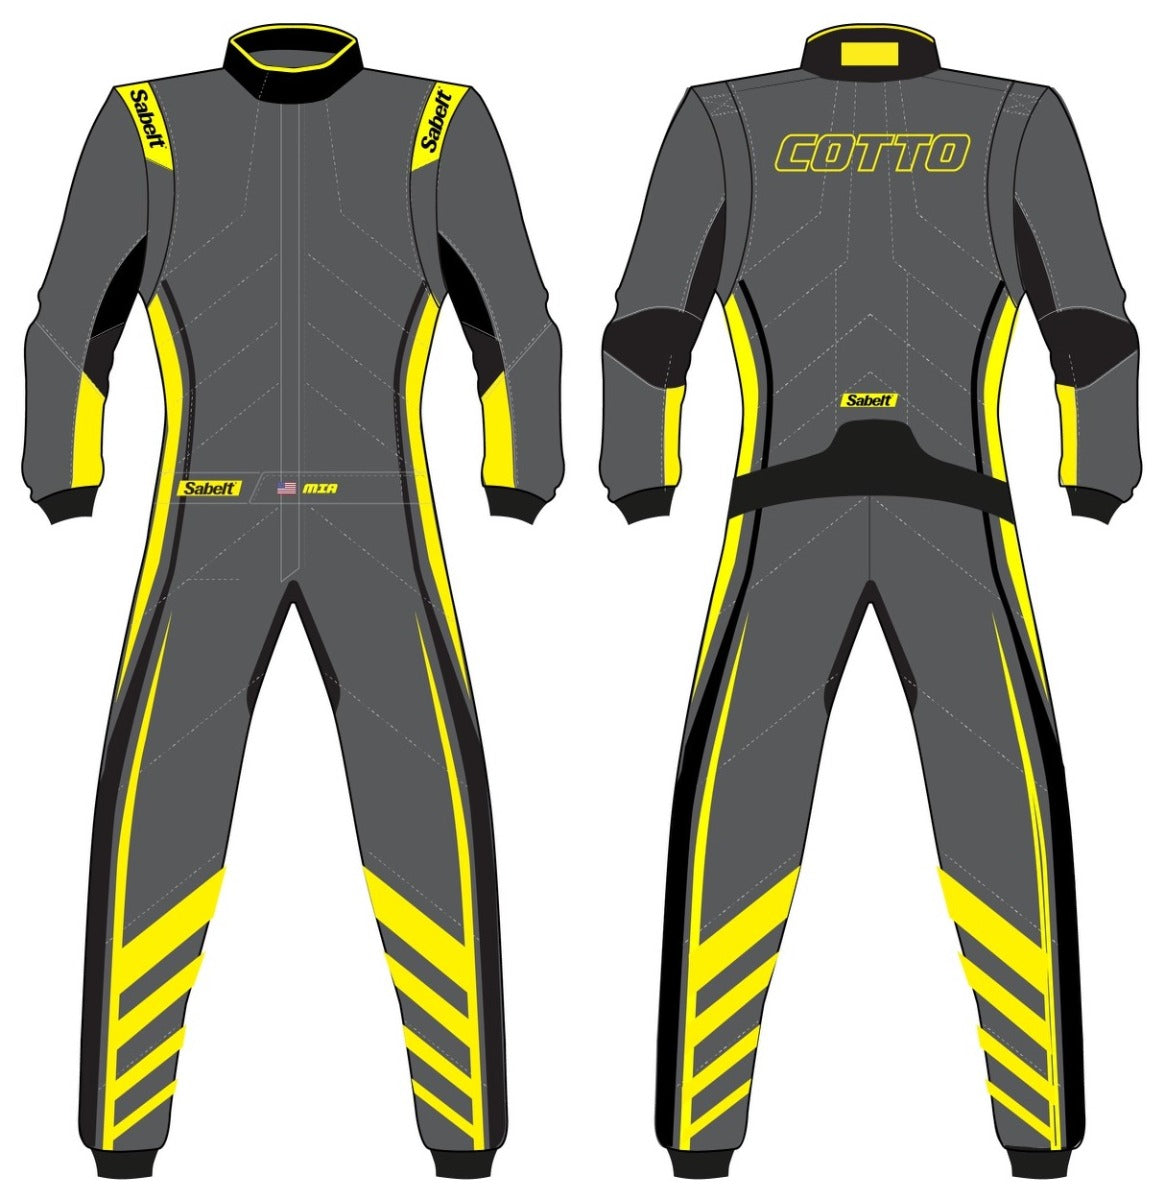 Sabelt TS-10 Race Suit Custom Design affordable best deal and lowest price after discount your logo